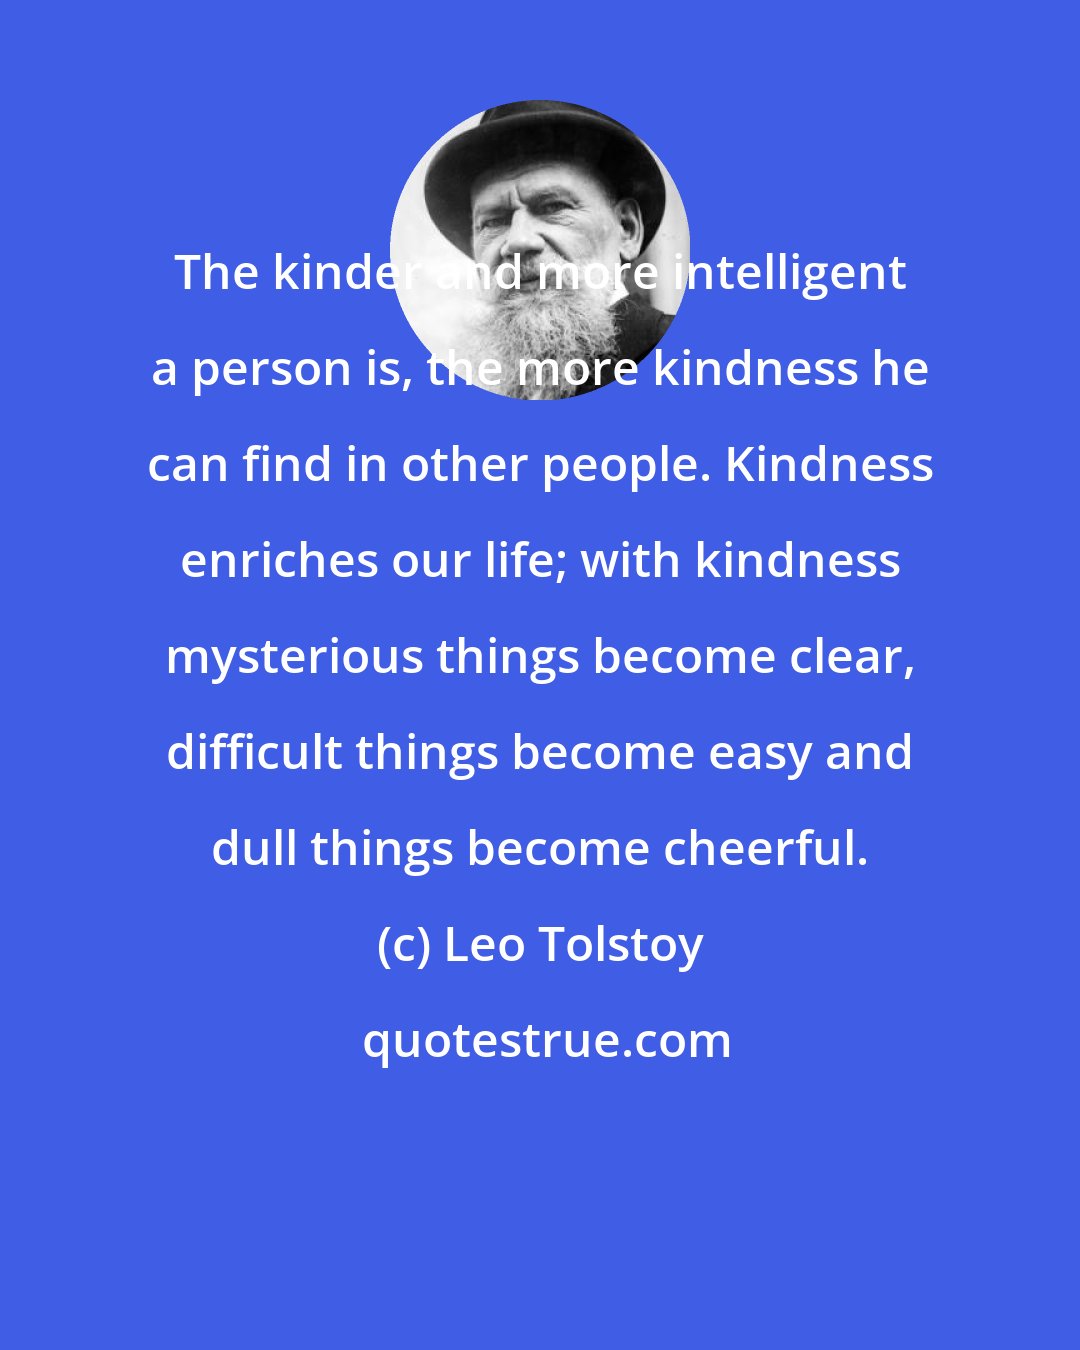 Leo Tolstoy: The kinder and more intelligent a person is, the more kindness he can find in other people. Kindness enriches our life; with kindness mysterious things become clear, difficult things become easy and dull things become cheerful.